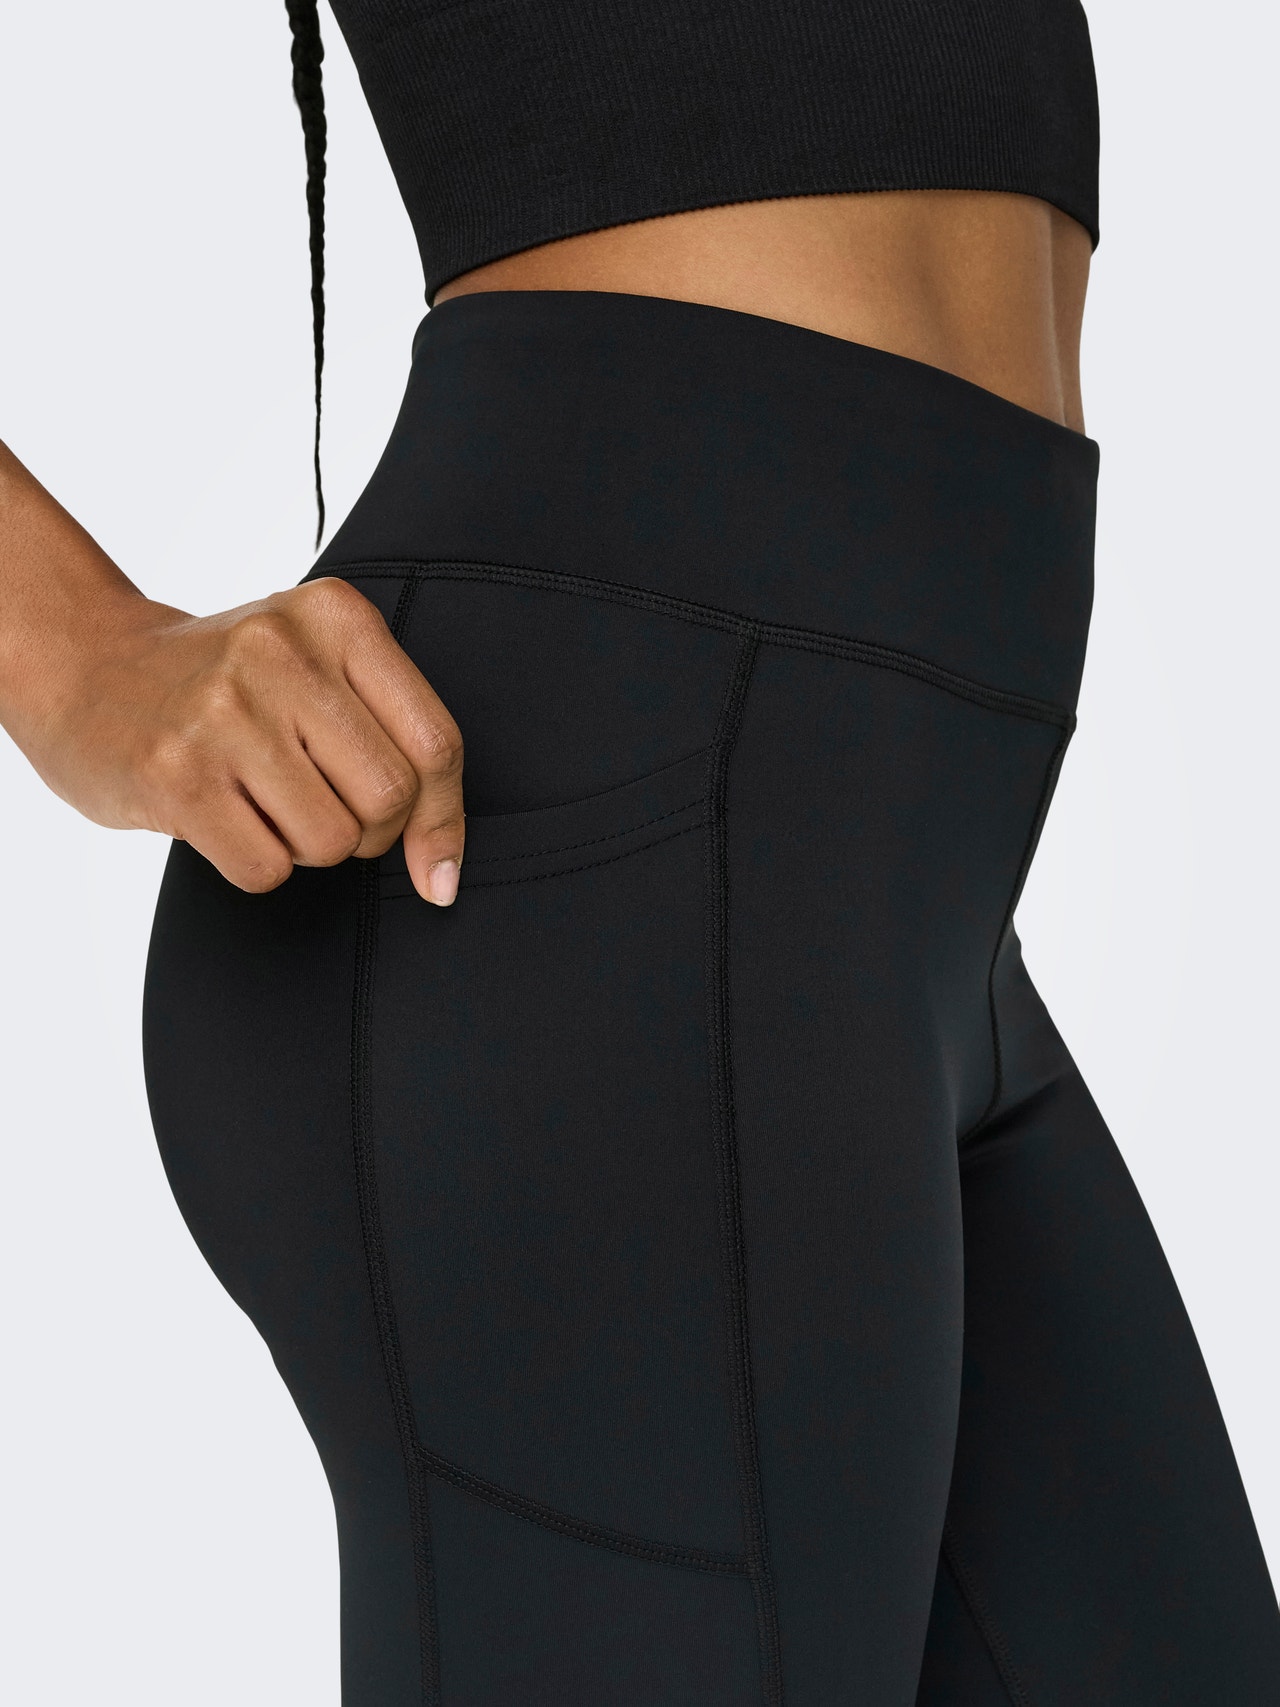 ONLY Tight fit High waist Legging -Black - 15274629